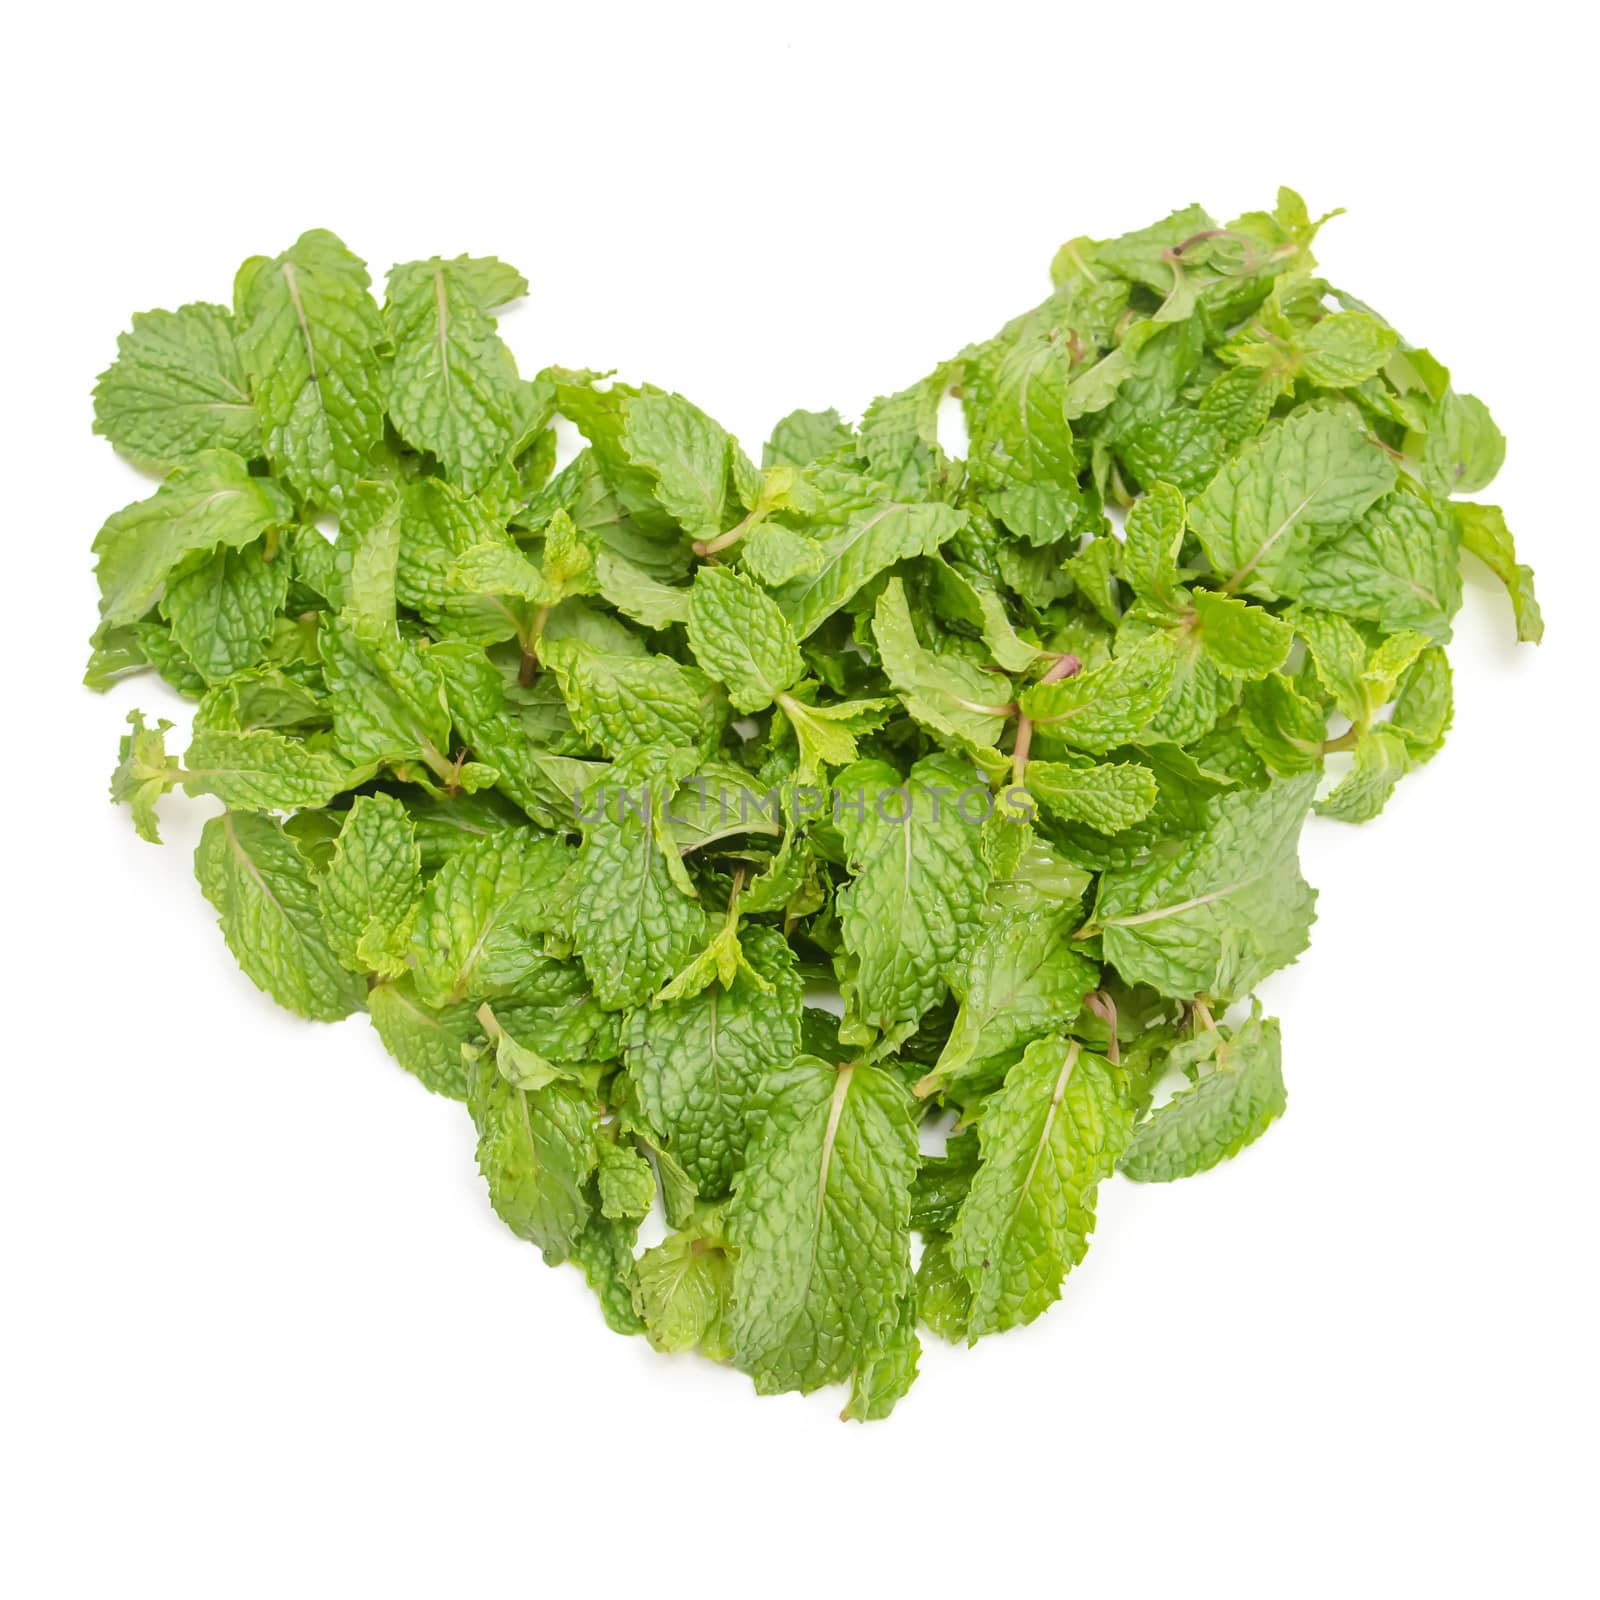 hart from three fresh mint leaves isolated on white background.  by kefiiir